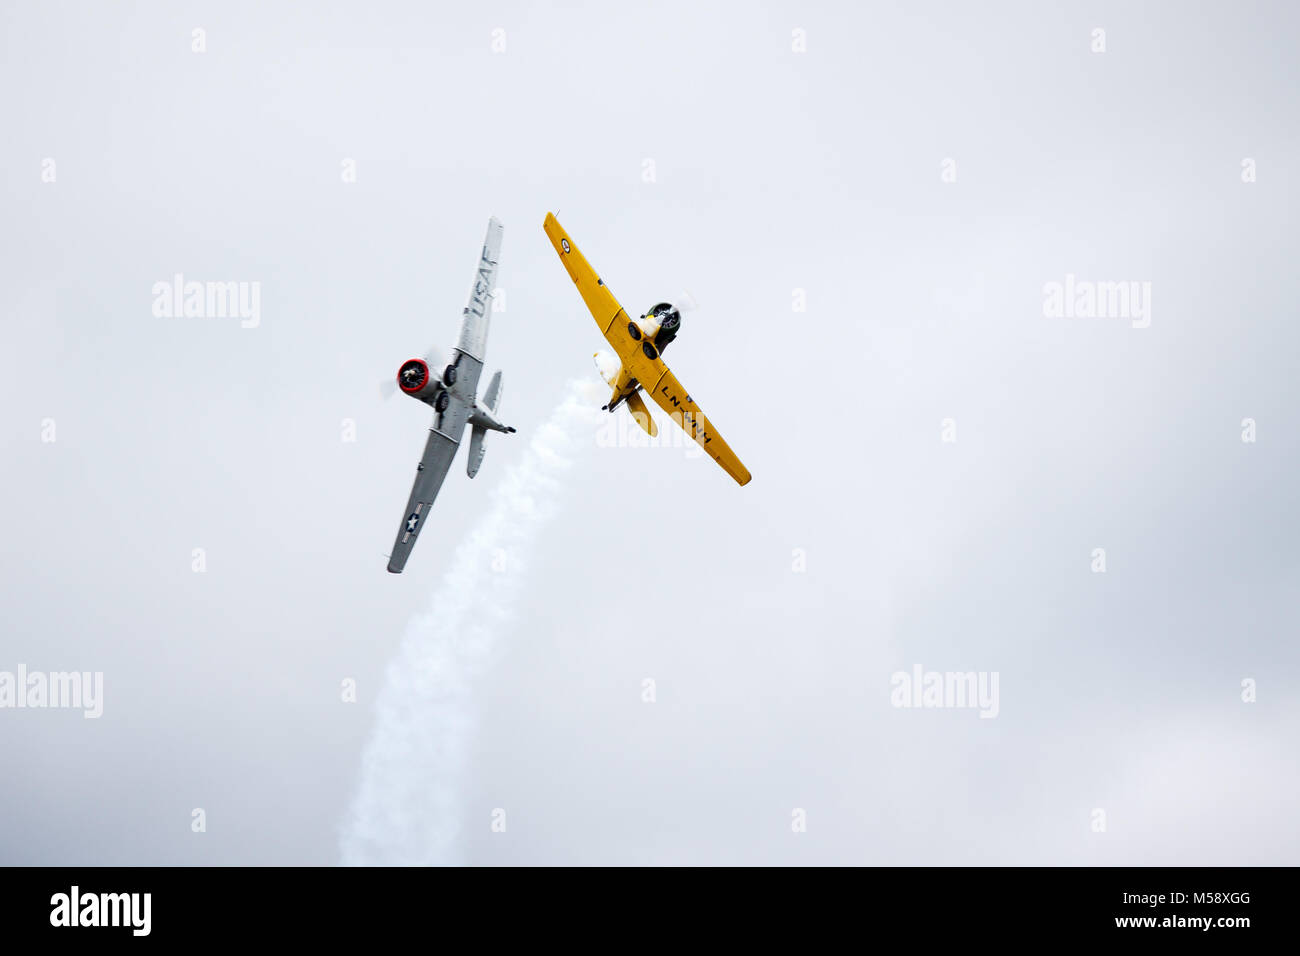 Two Harvard North American AT-6 Texan airplanes, showing off their skills in an airshow at Kjeller Airport, Norway. Stock Photo